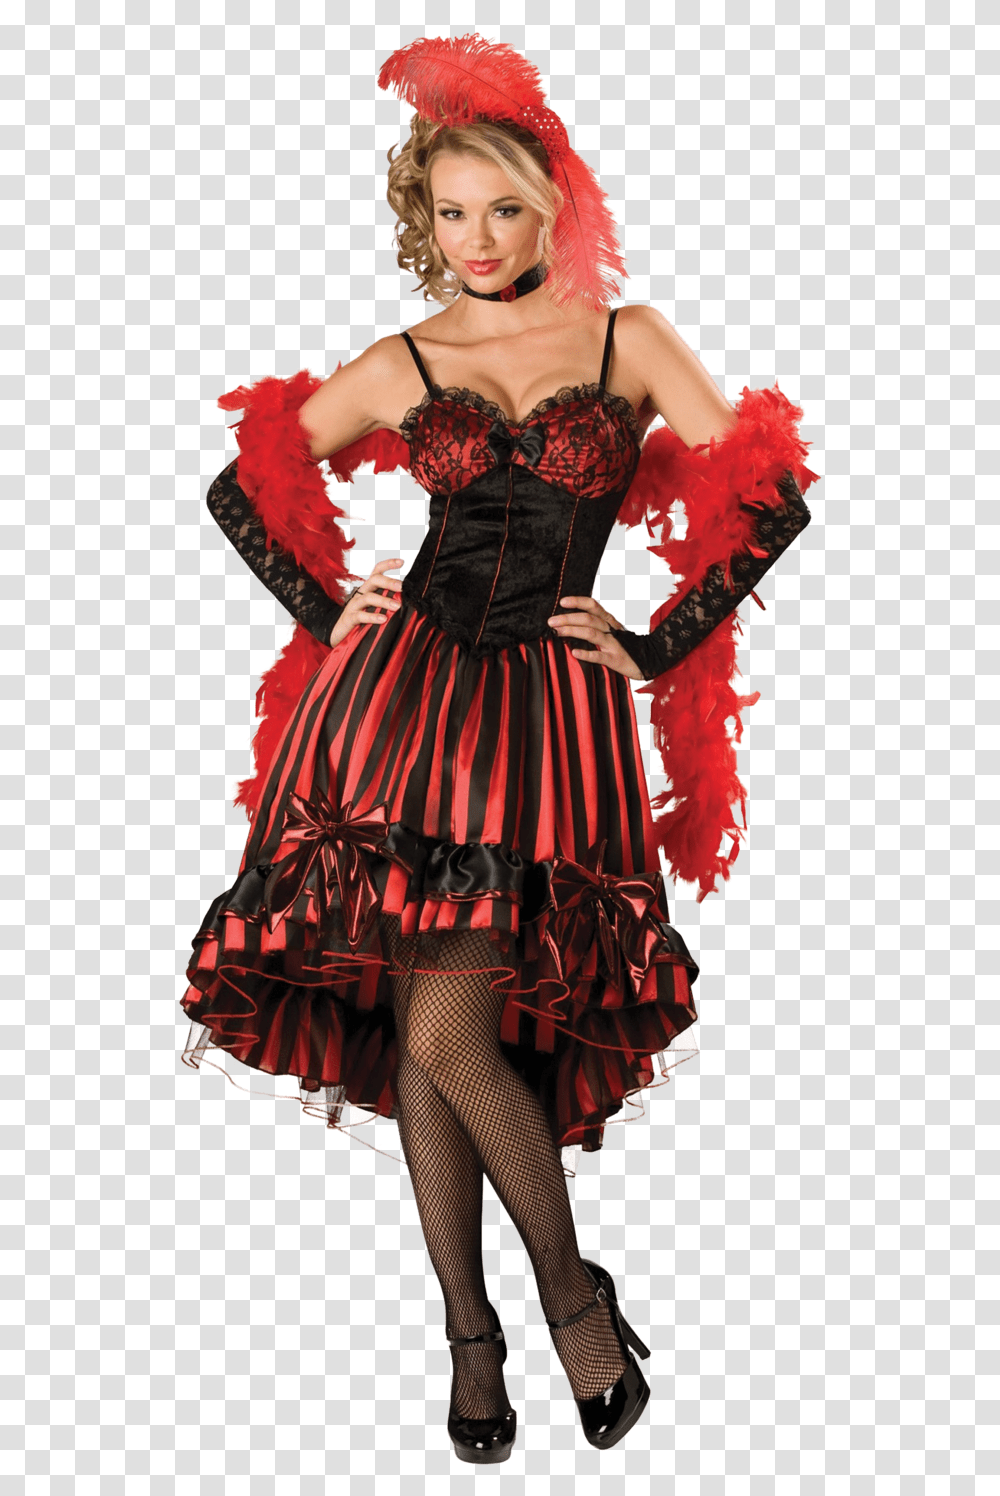 Pin By Cooper Iscute On Western 2014 In 2019, Apparel, Performer, Person Transparent Png